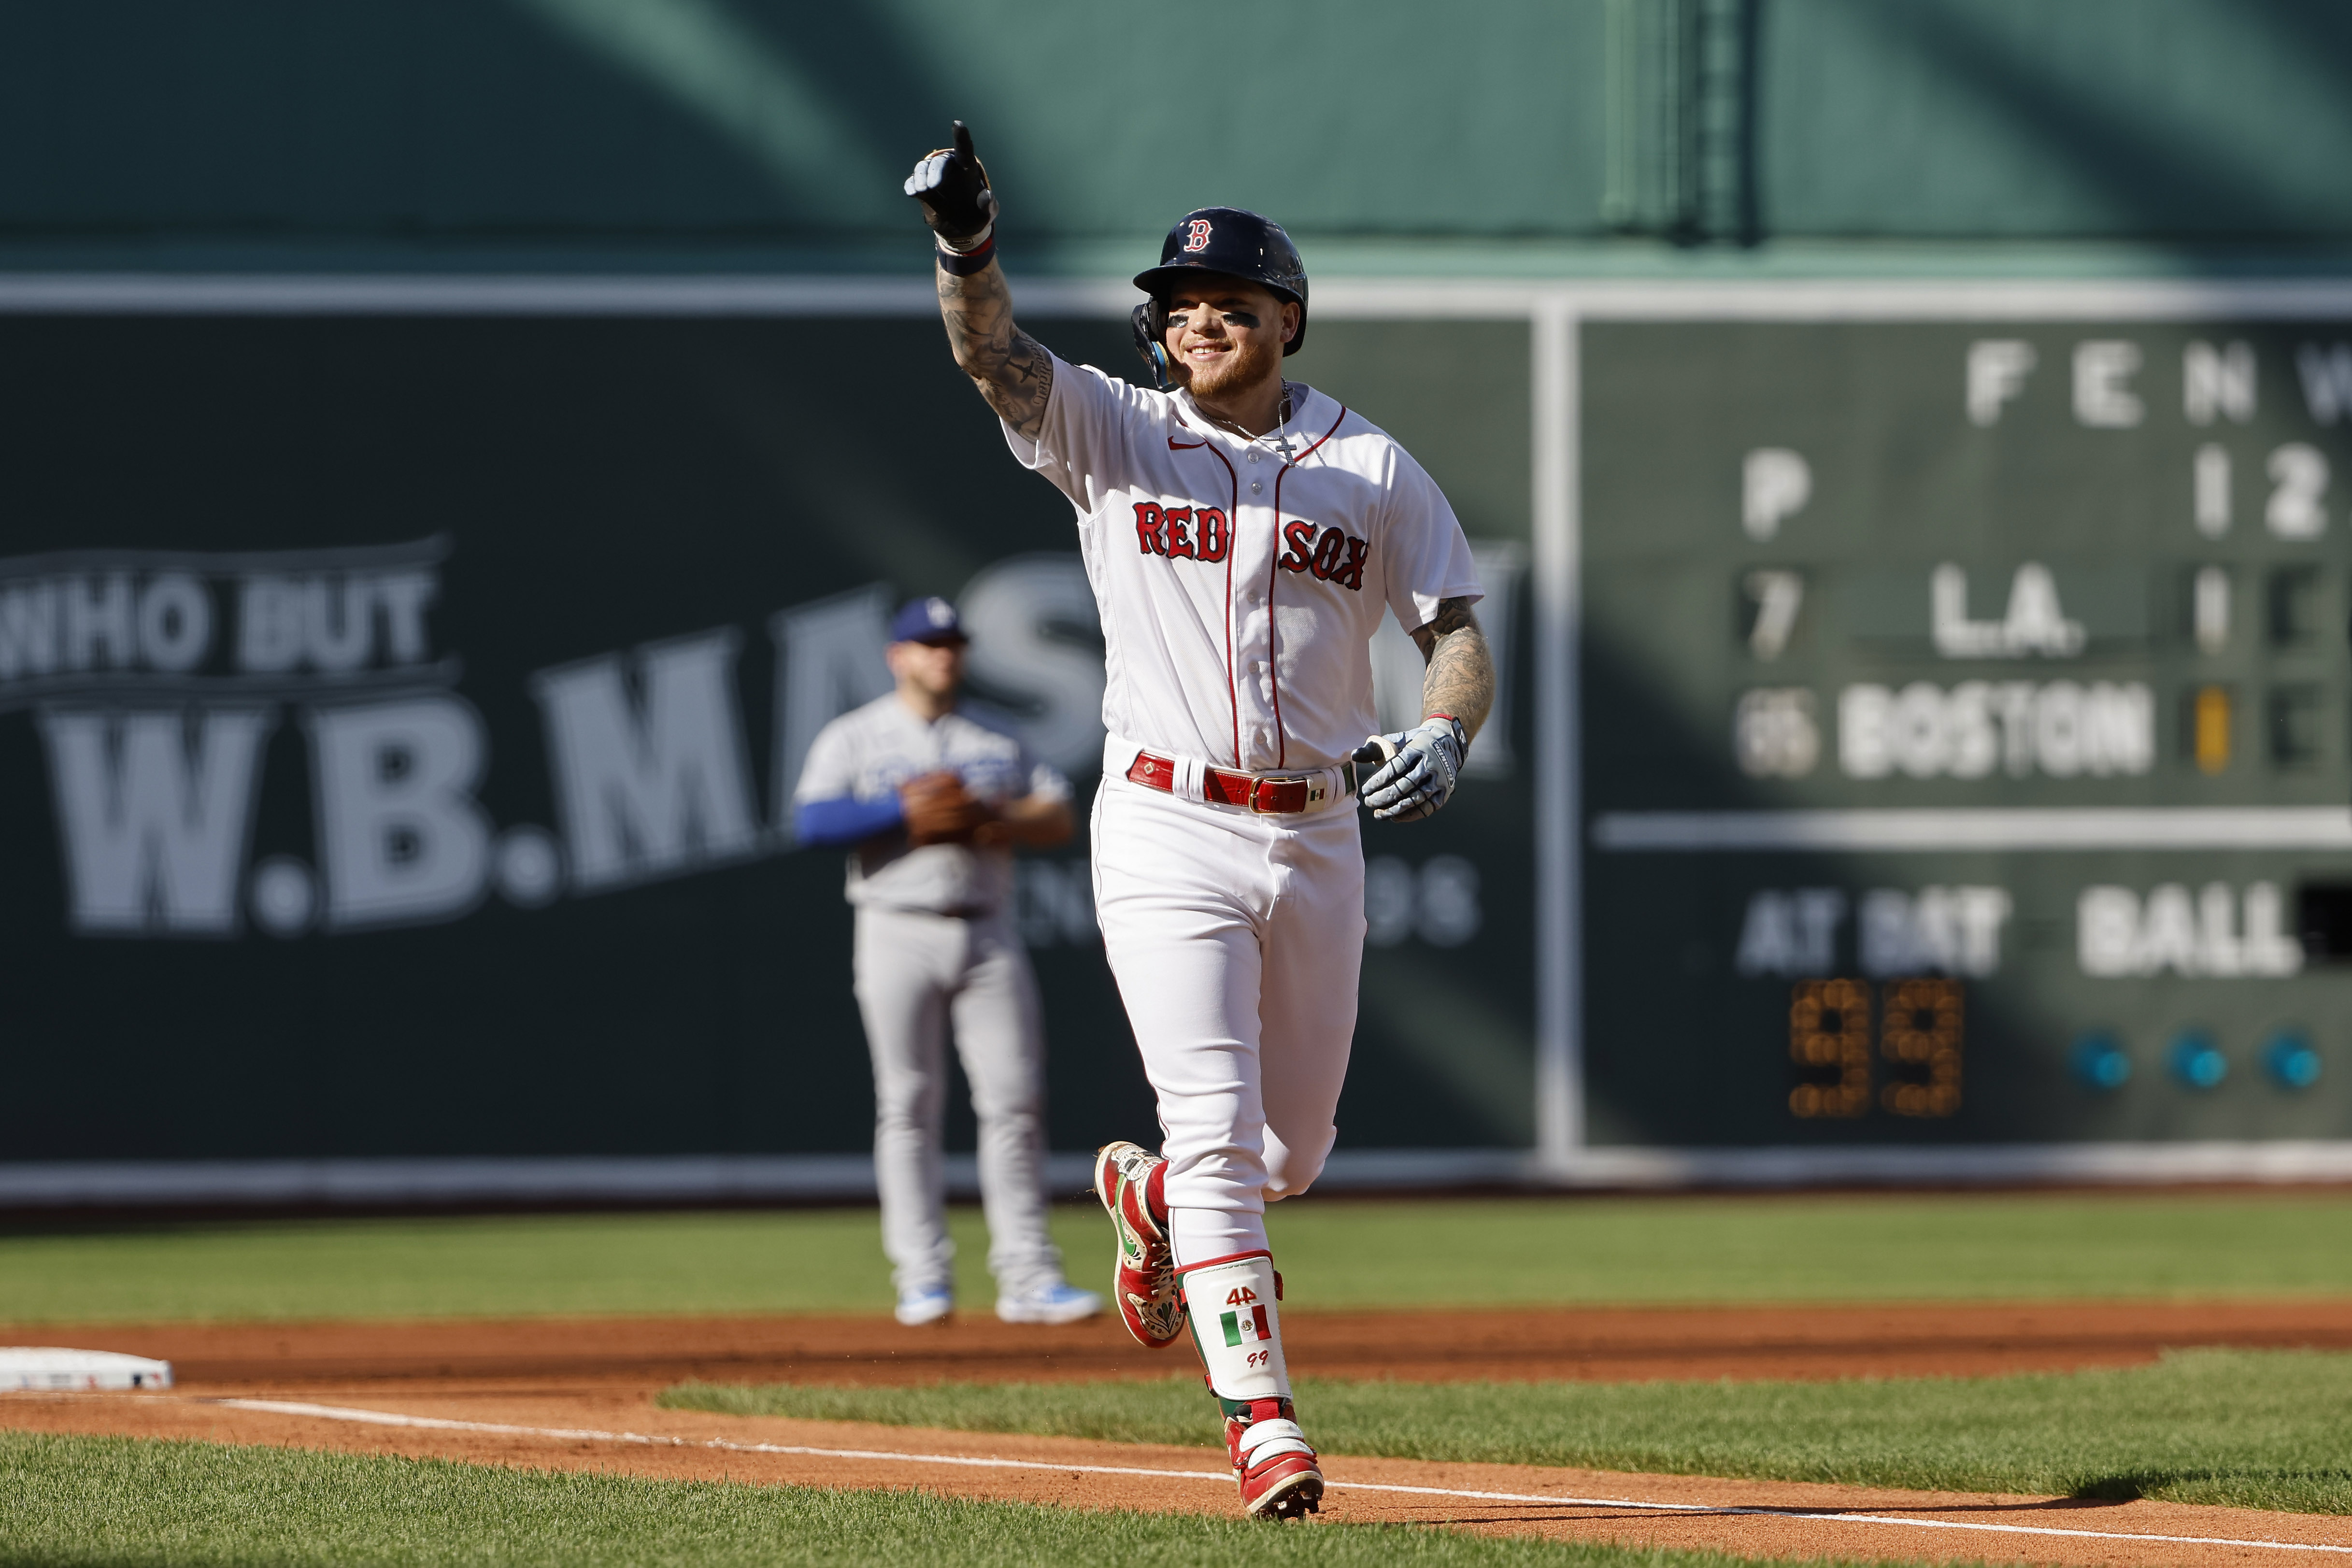 More refreshed' Alex Verdugo back in Red Sox lineup after taking